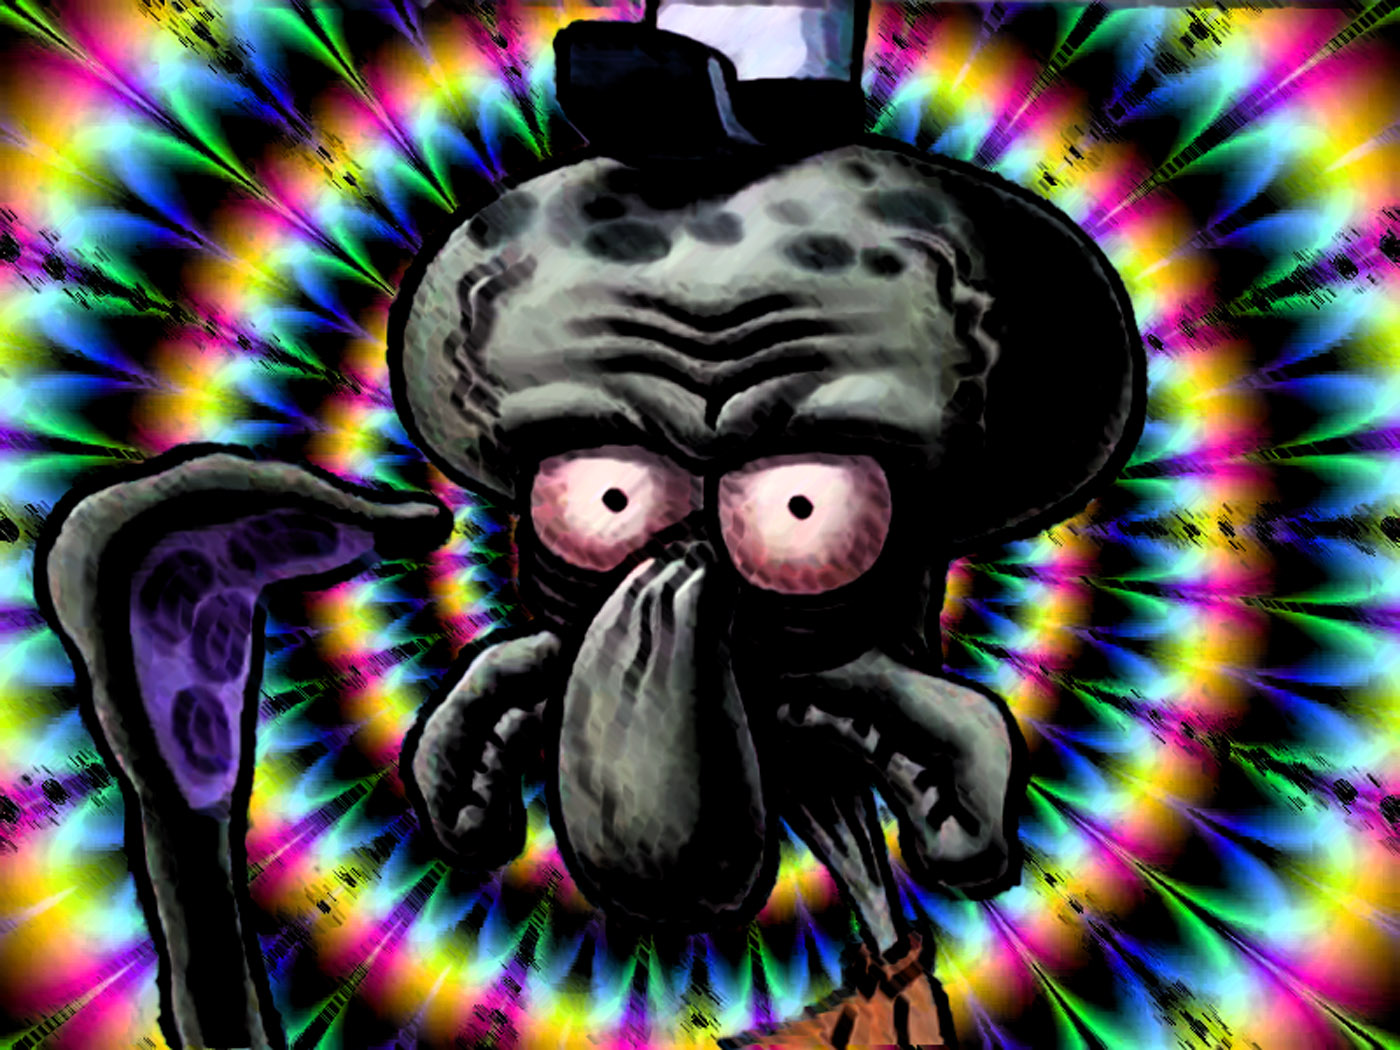 Psychedelic_Squidward_by_FetusSexytime.jpg